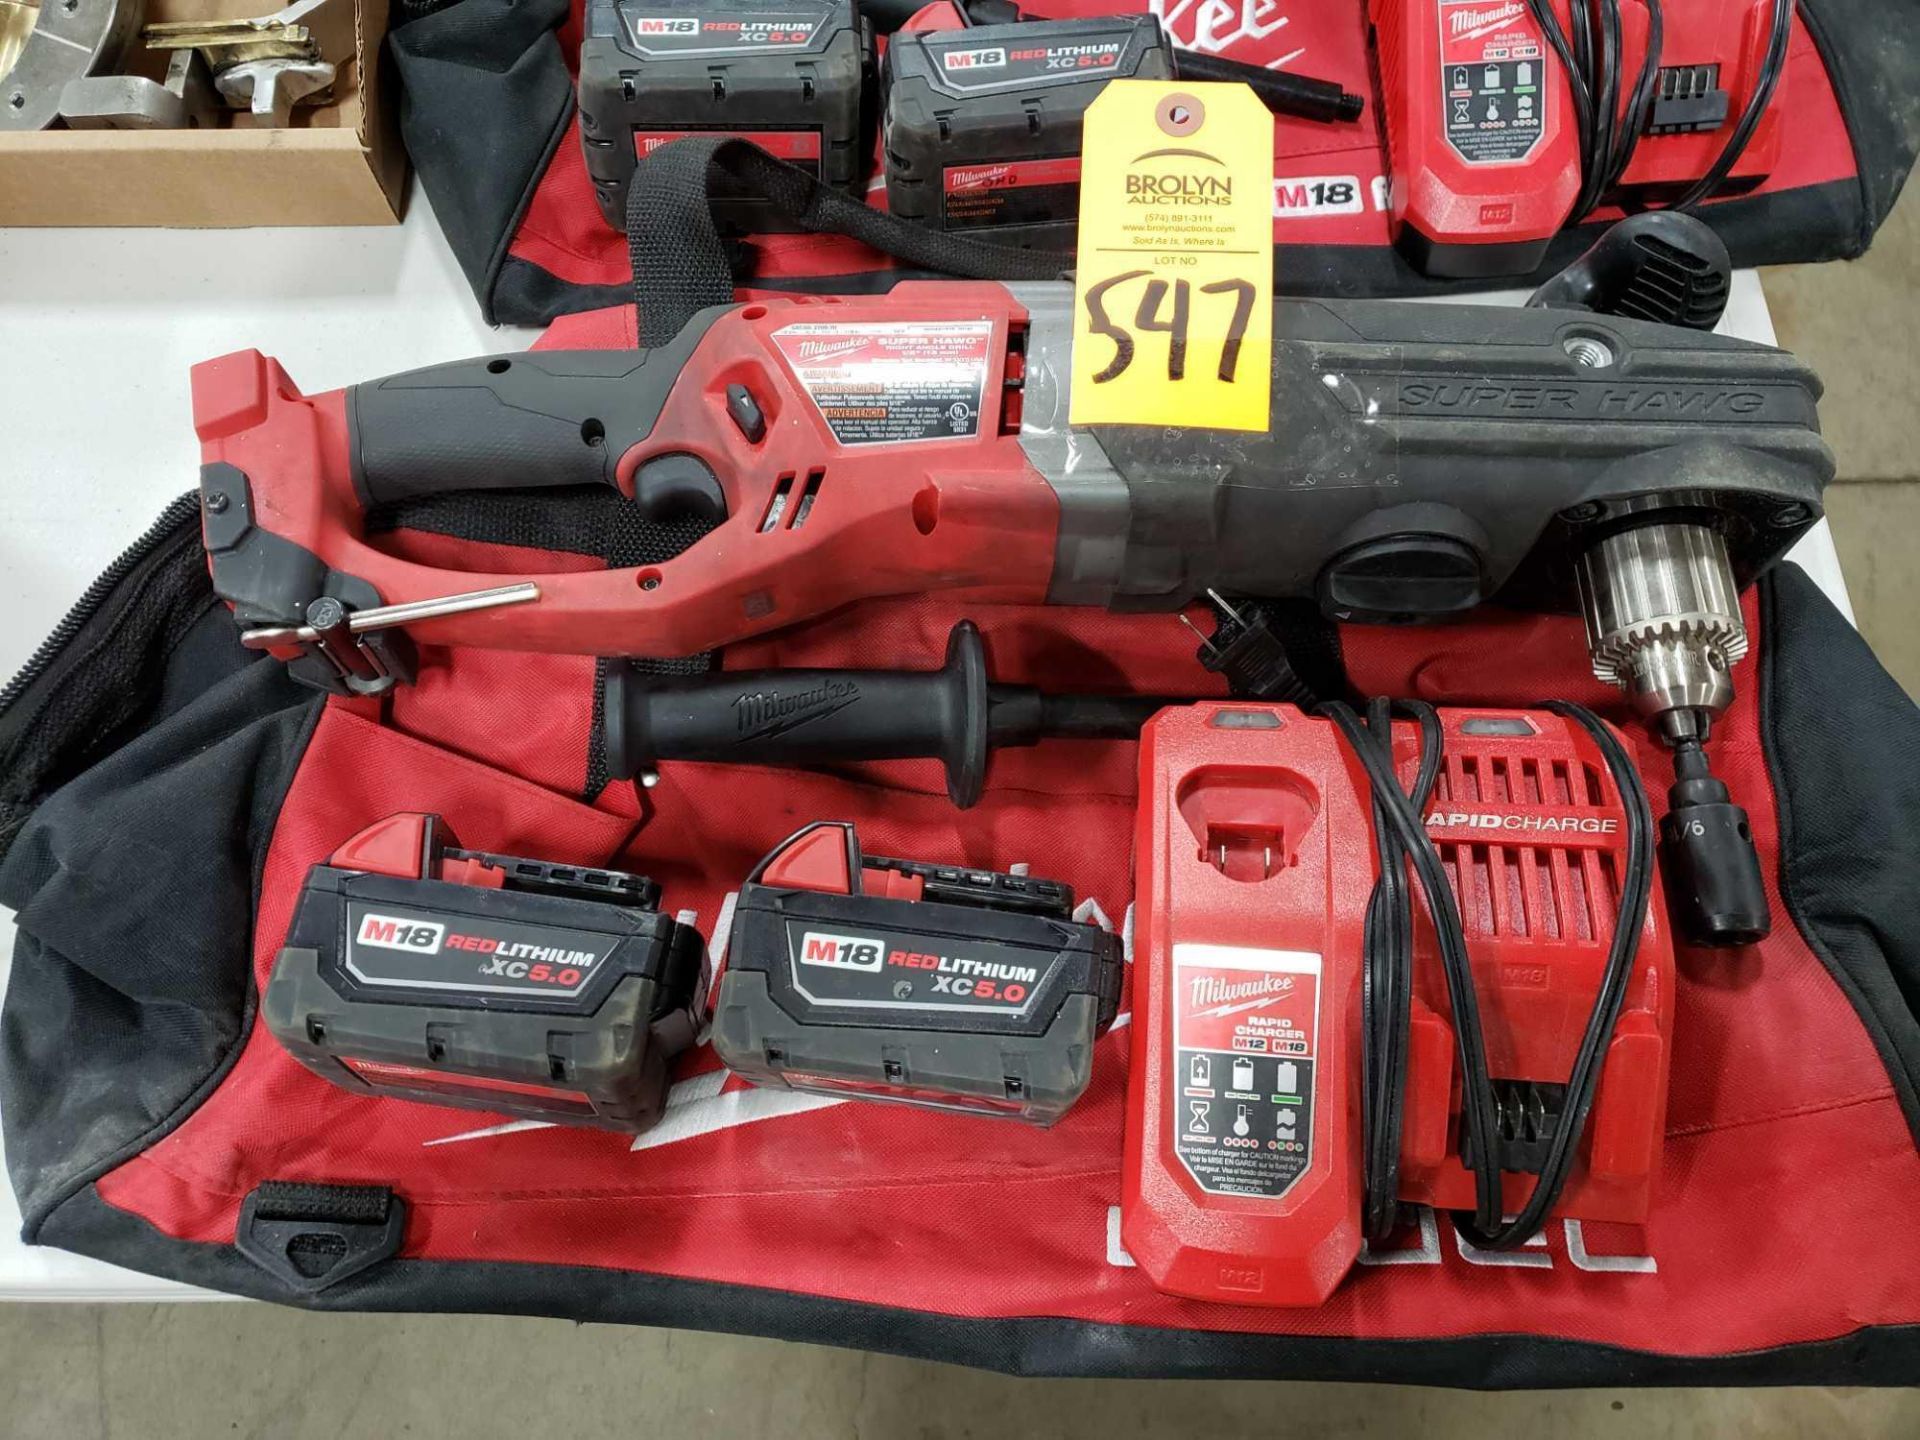 18v Milwaukee 1/2" super hawg right angle cordless drill with 2 batteries, charger, and storage bag.